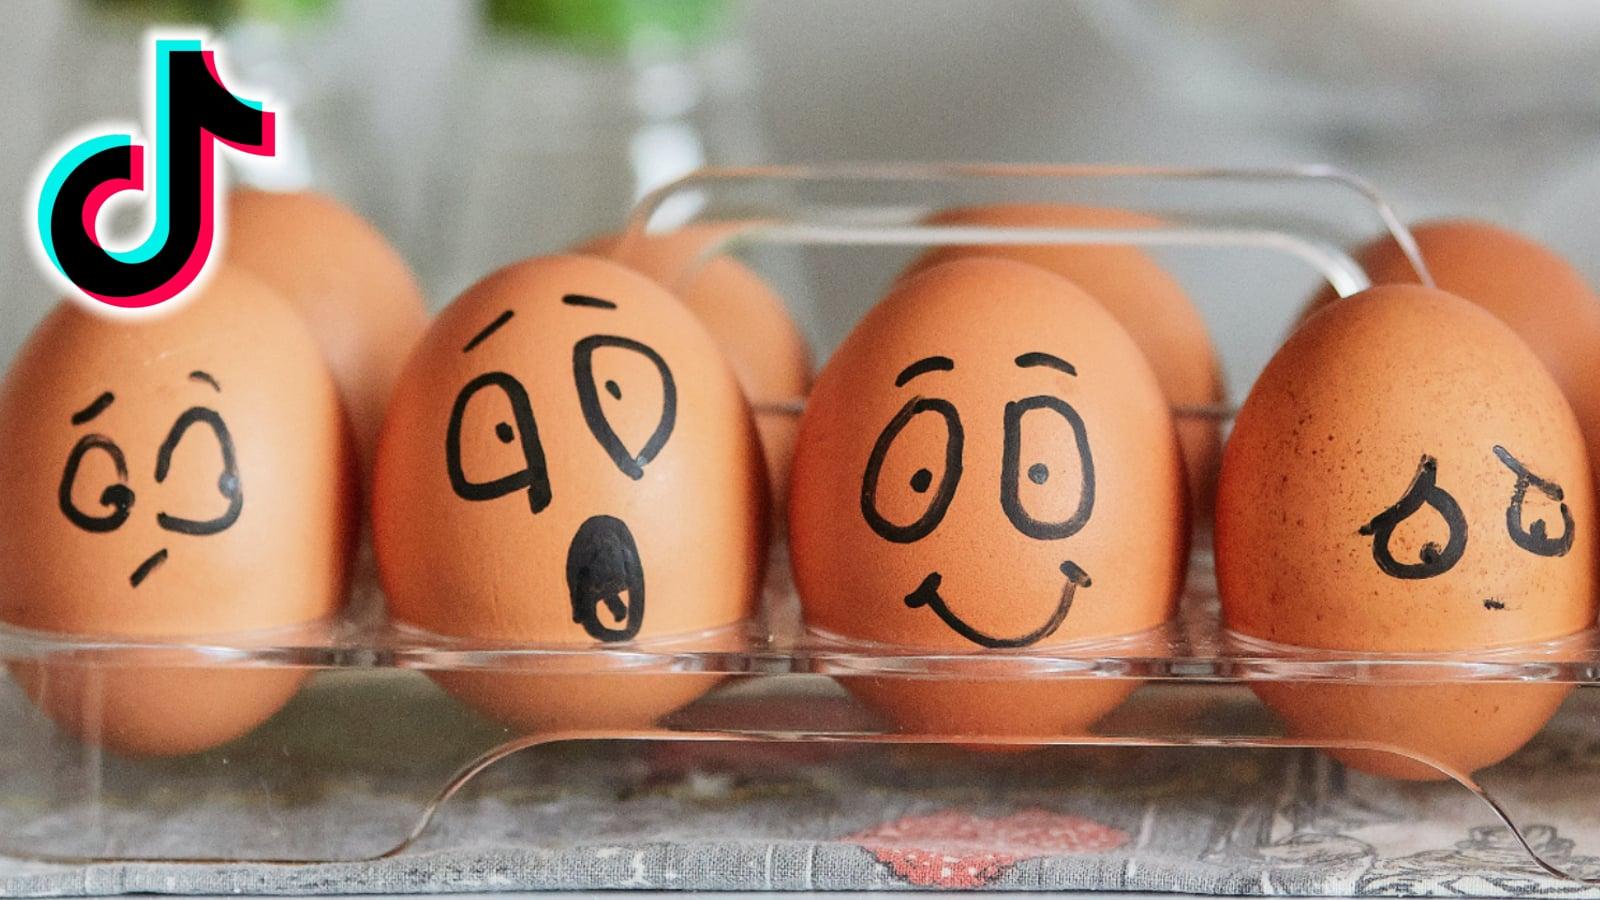 Eggs with faces on them